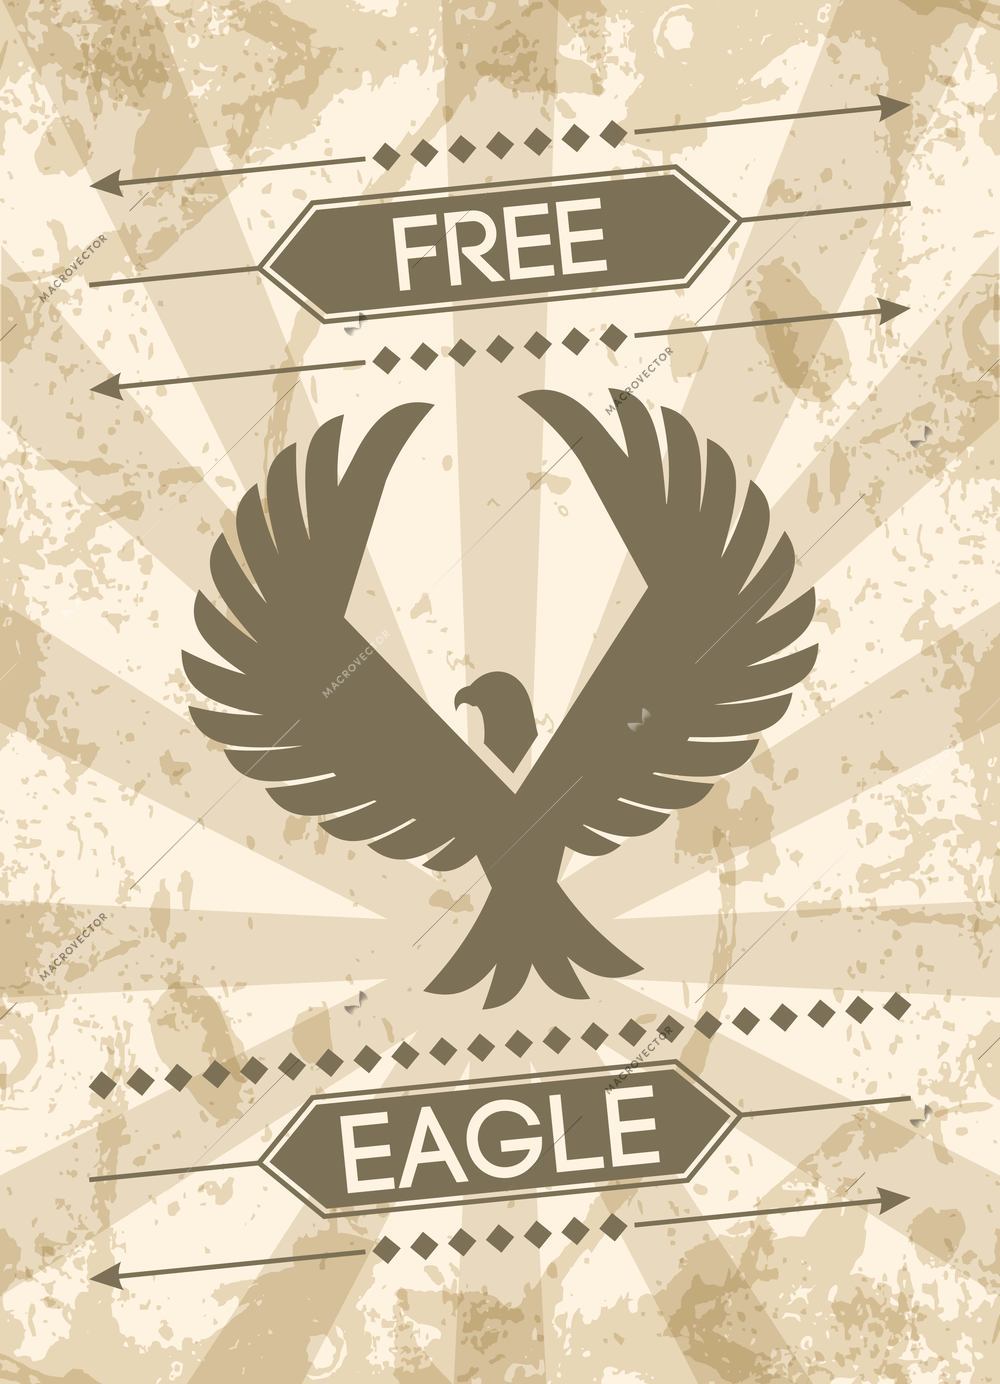 Eagle grunge style poster with flat bird silhouette and text vector illustration